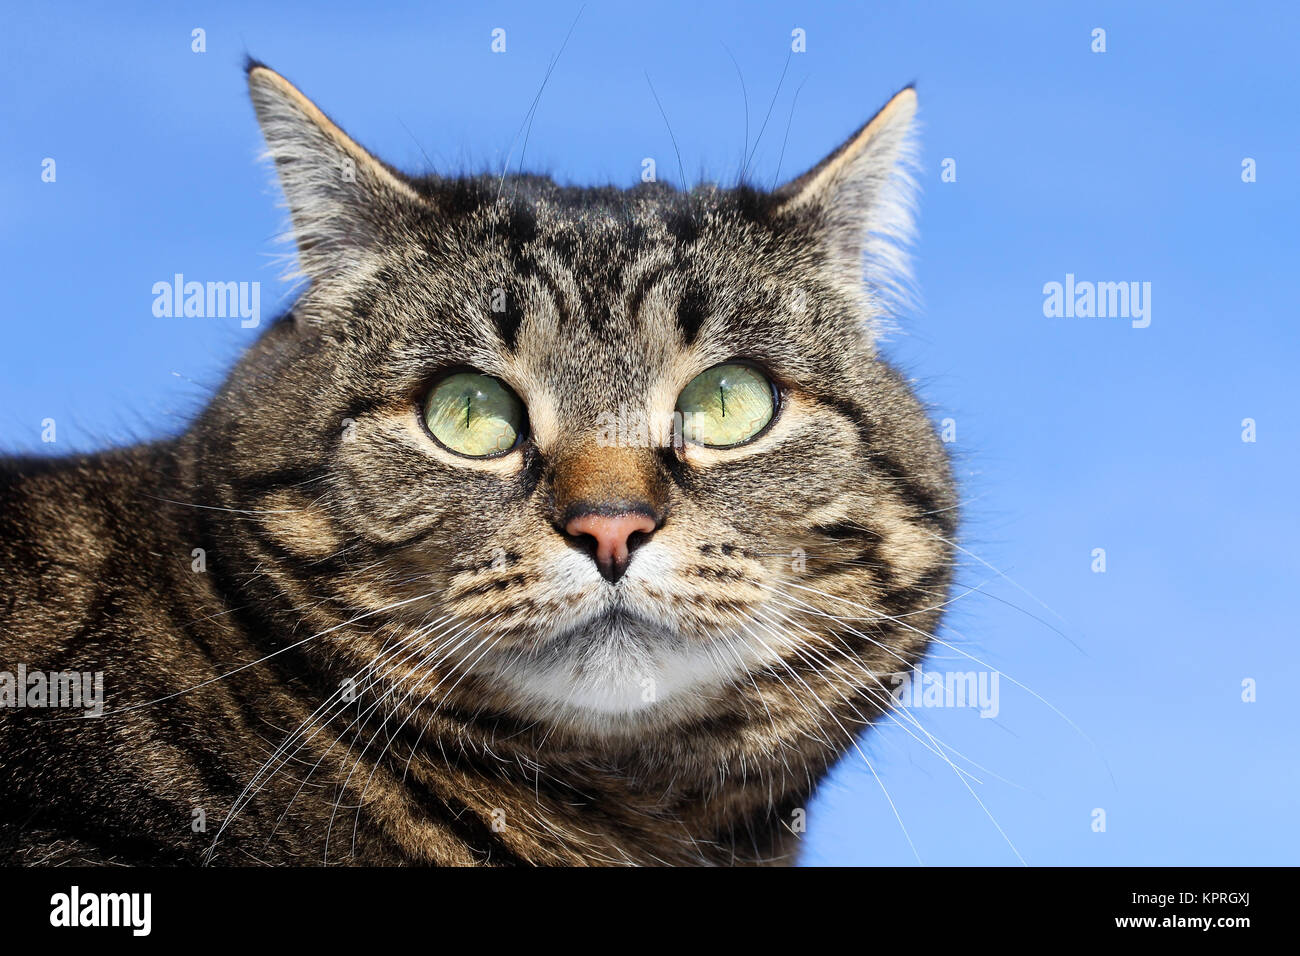 the curious interested gaze of a cat Stock Photo